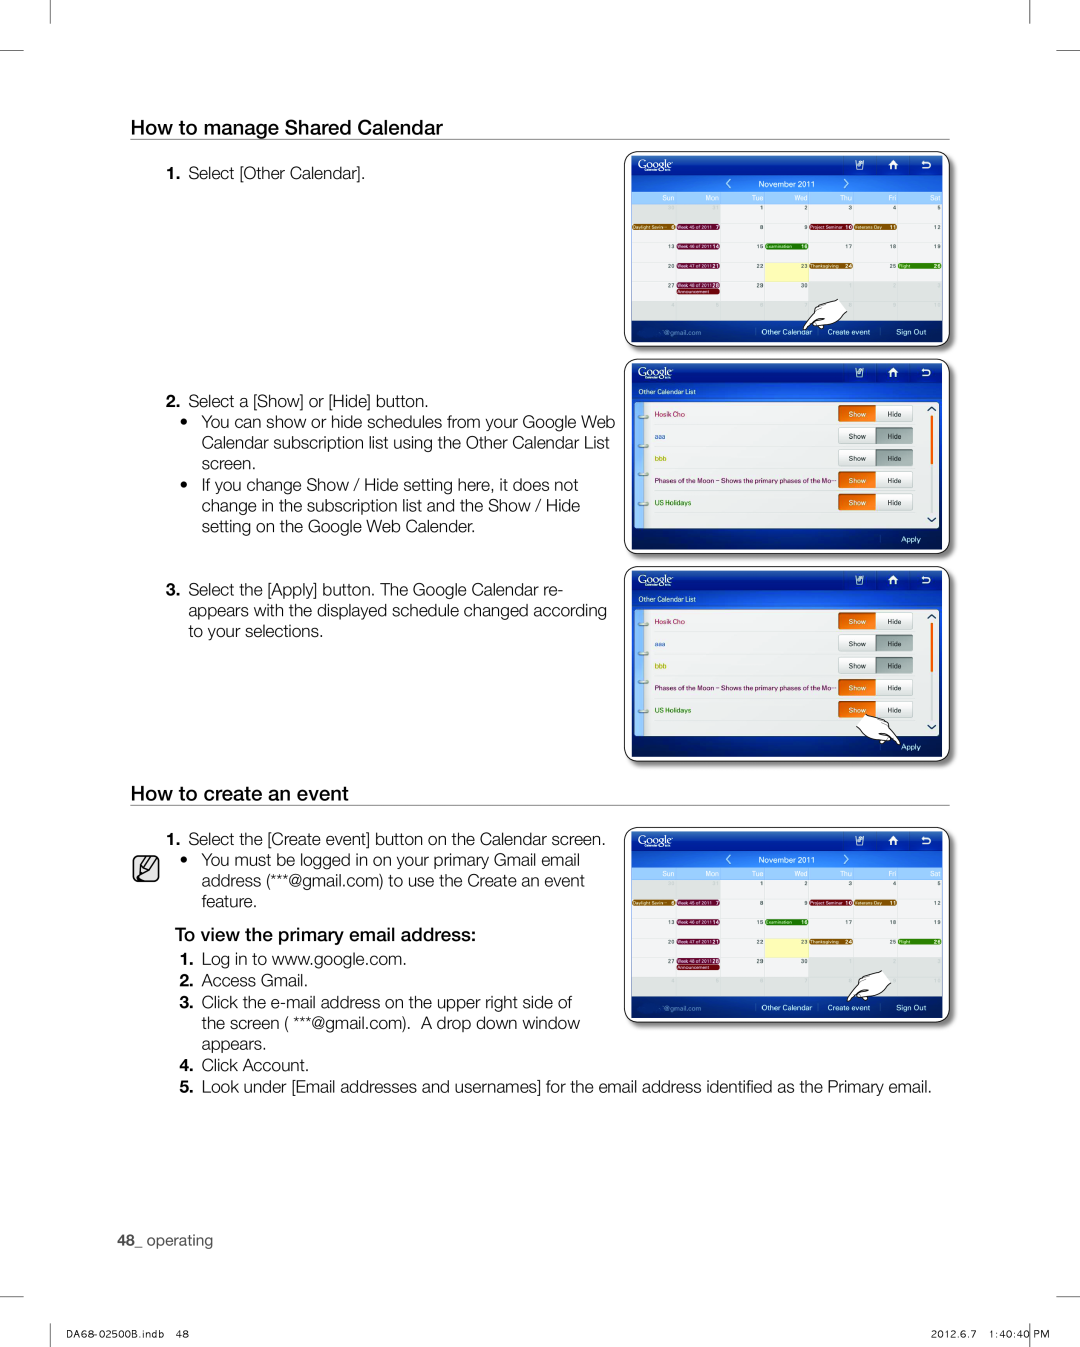 Samsung RSG309AARS user manual How to manage Shared Calendar, How to create an event, To view the primary email address 